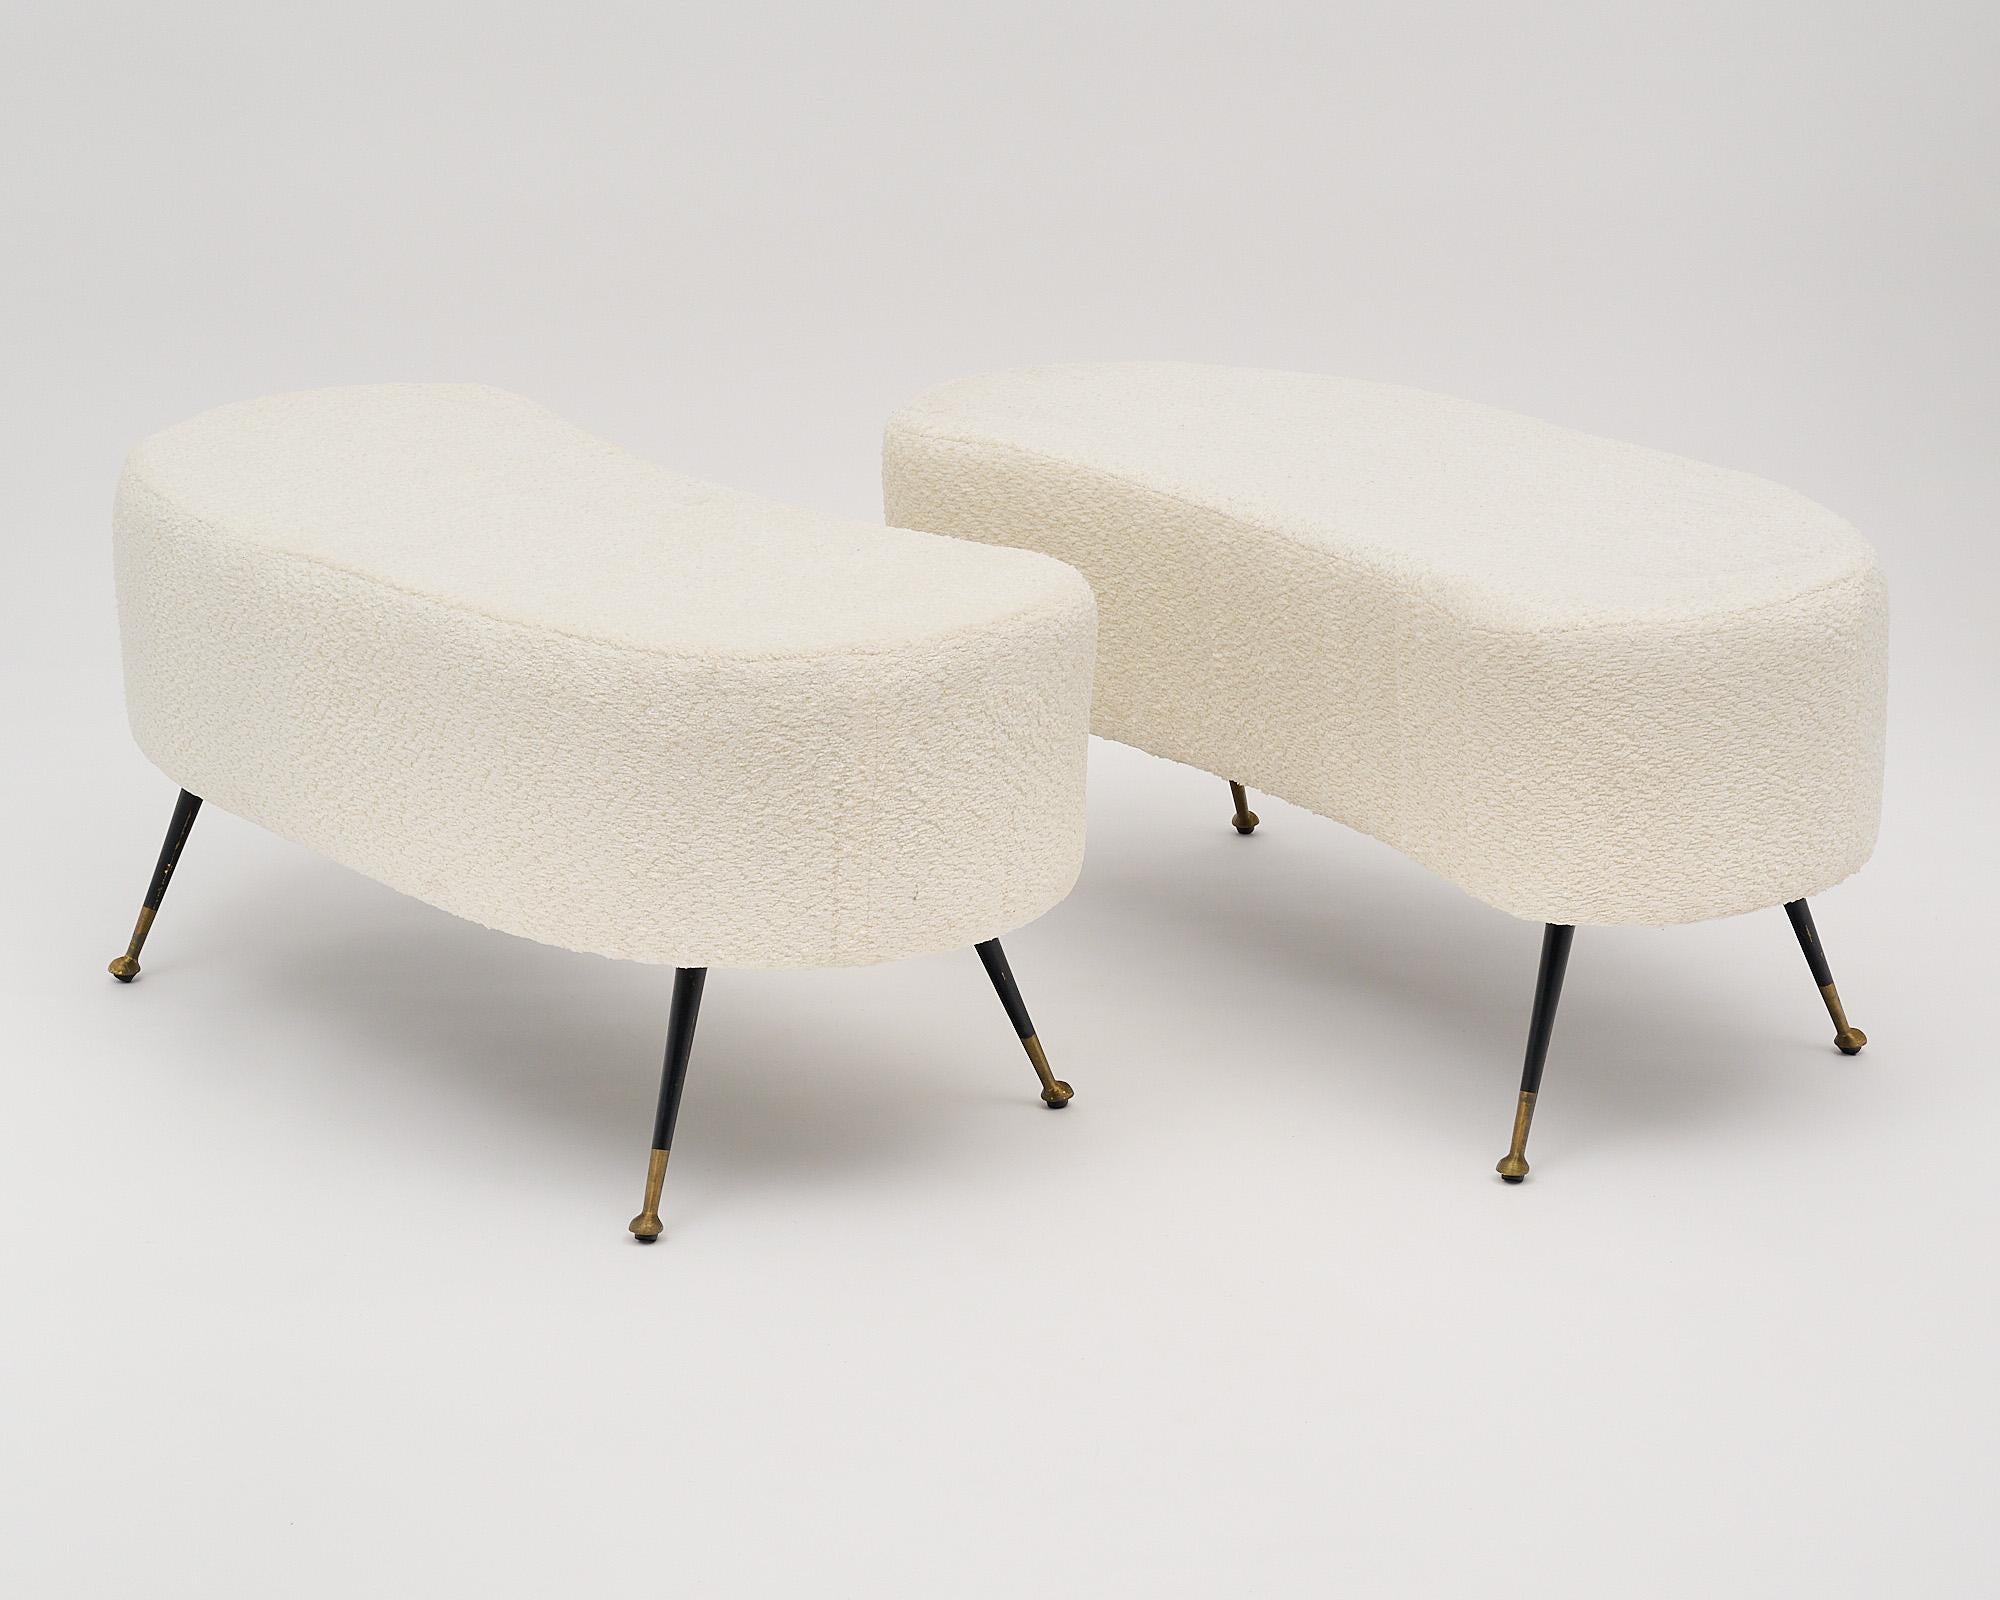 Italian pair of vintage benches with flaring black lacquered legs and solid brass-capped feet. We love their unique and quirky “bean-like” shape, and their quintessential Italian mid-century vibe. They have been newly upholstered in a white boucle